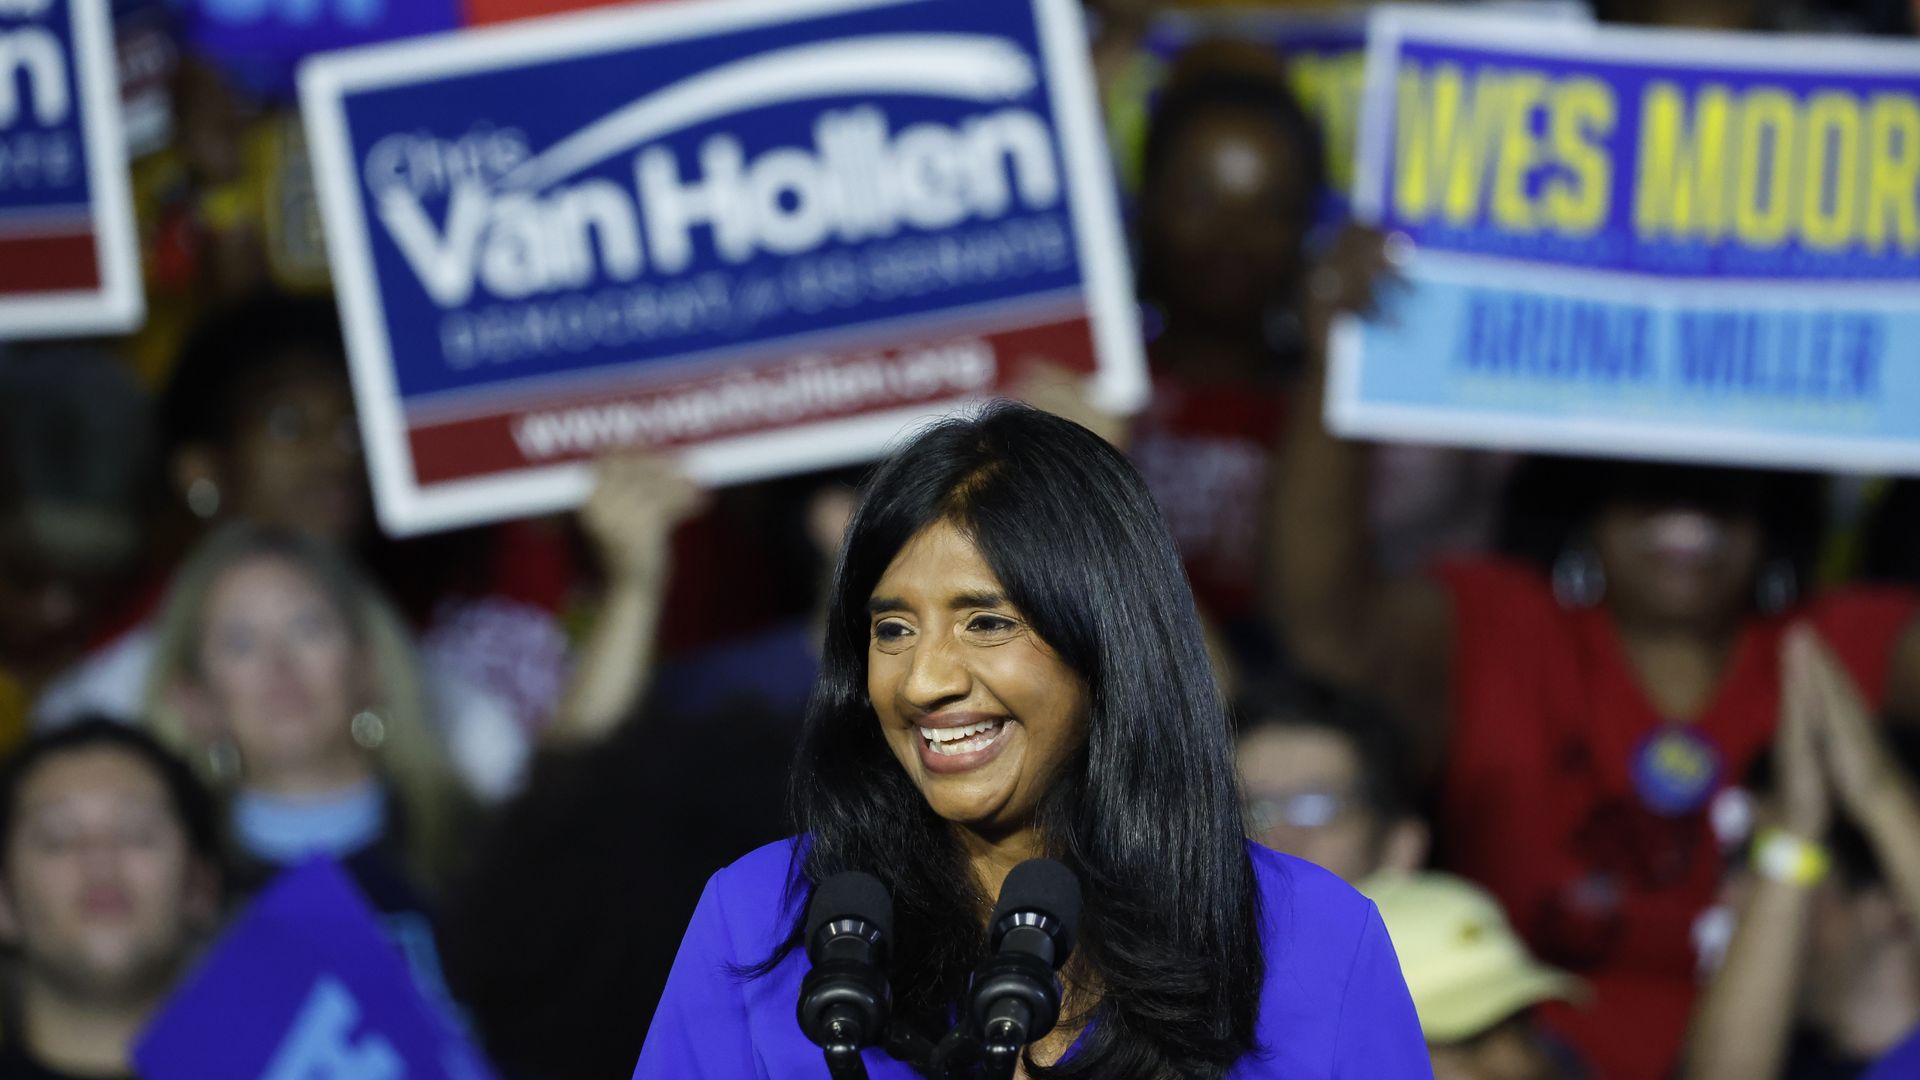 Photo of Aruna Miller smiling while speaking from a podium at a campaign rally